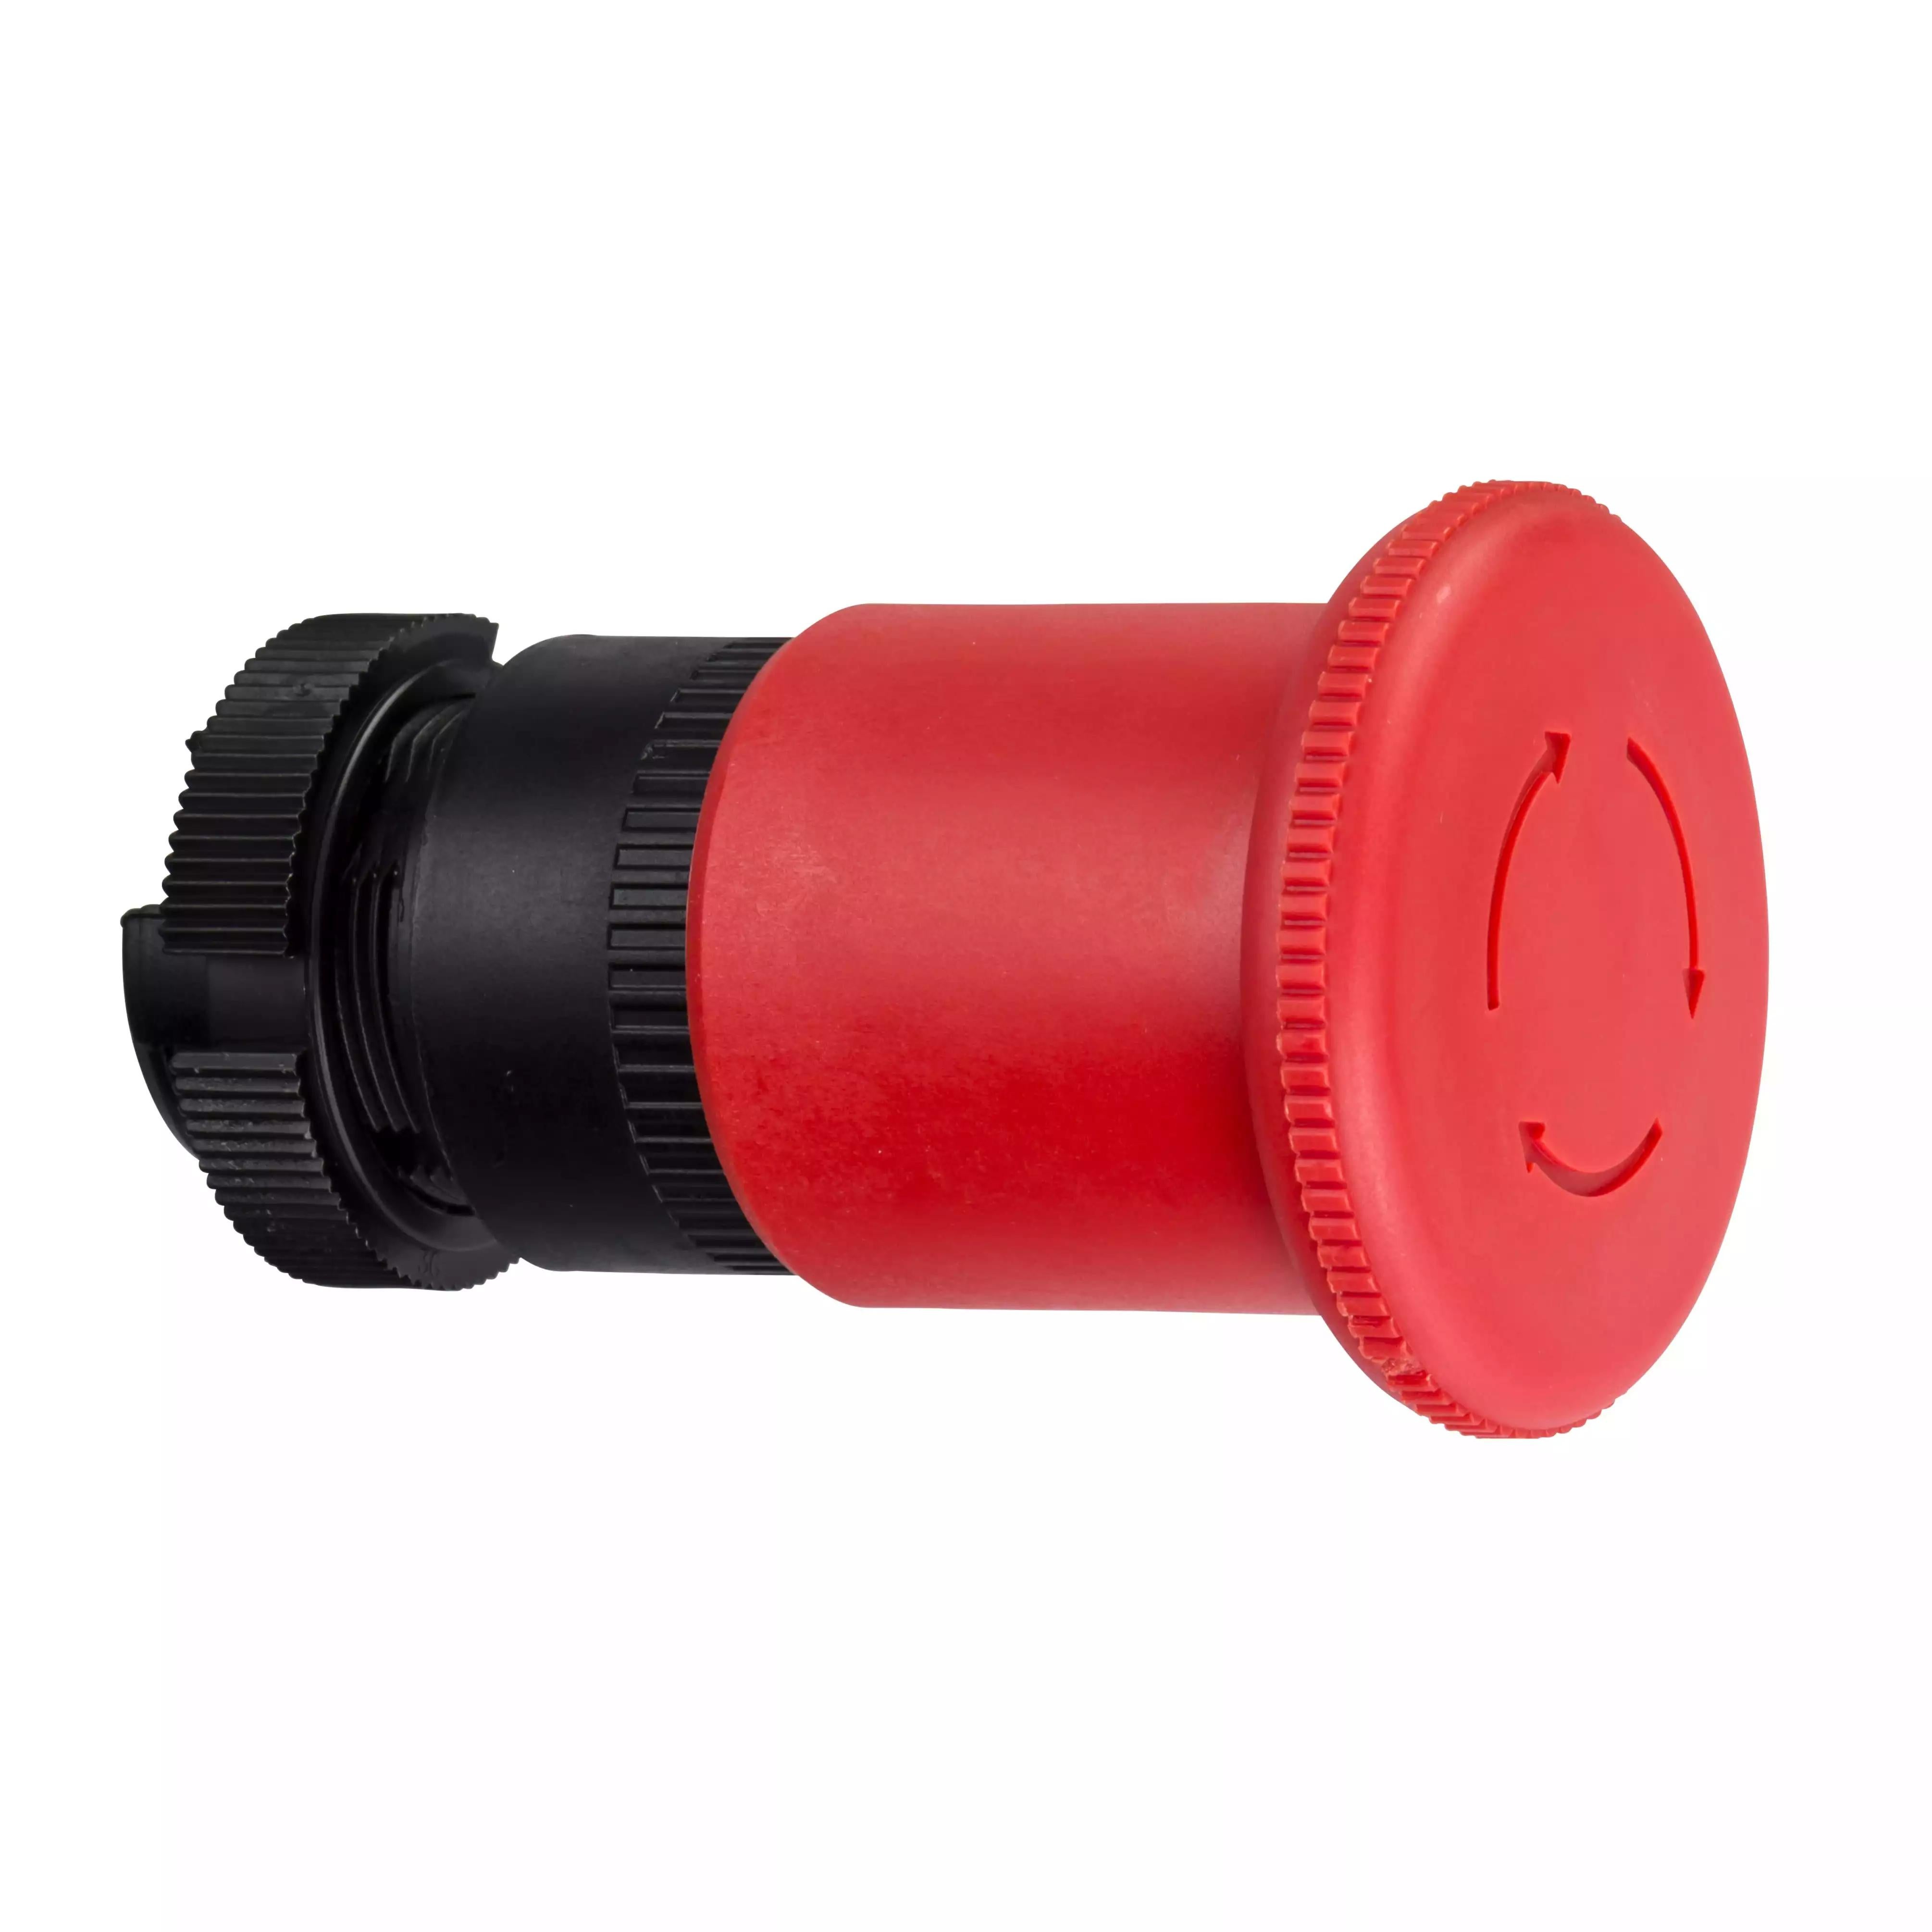 red Ø40 Emergency stop, switching off head trigger and latching turn release